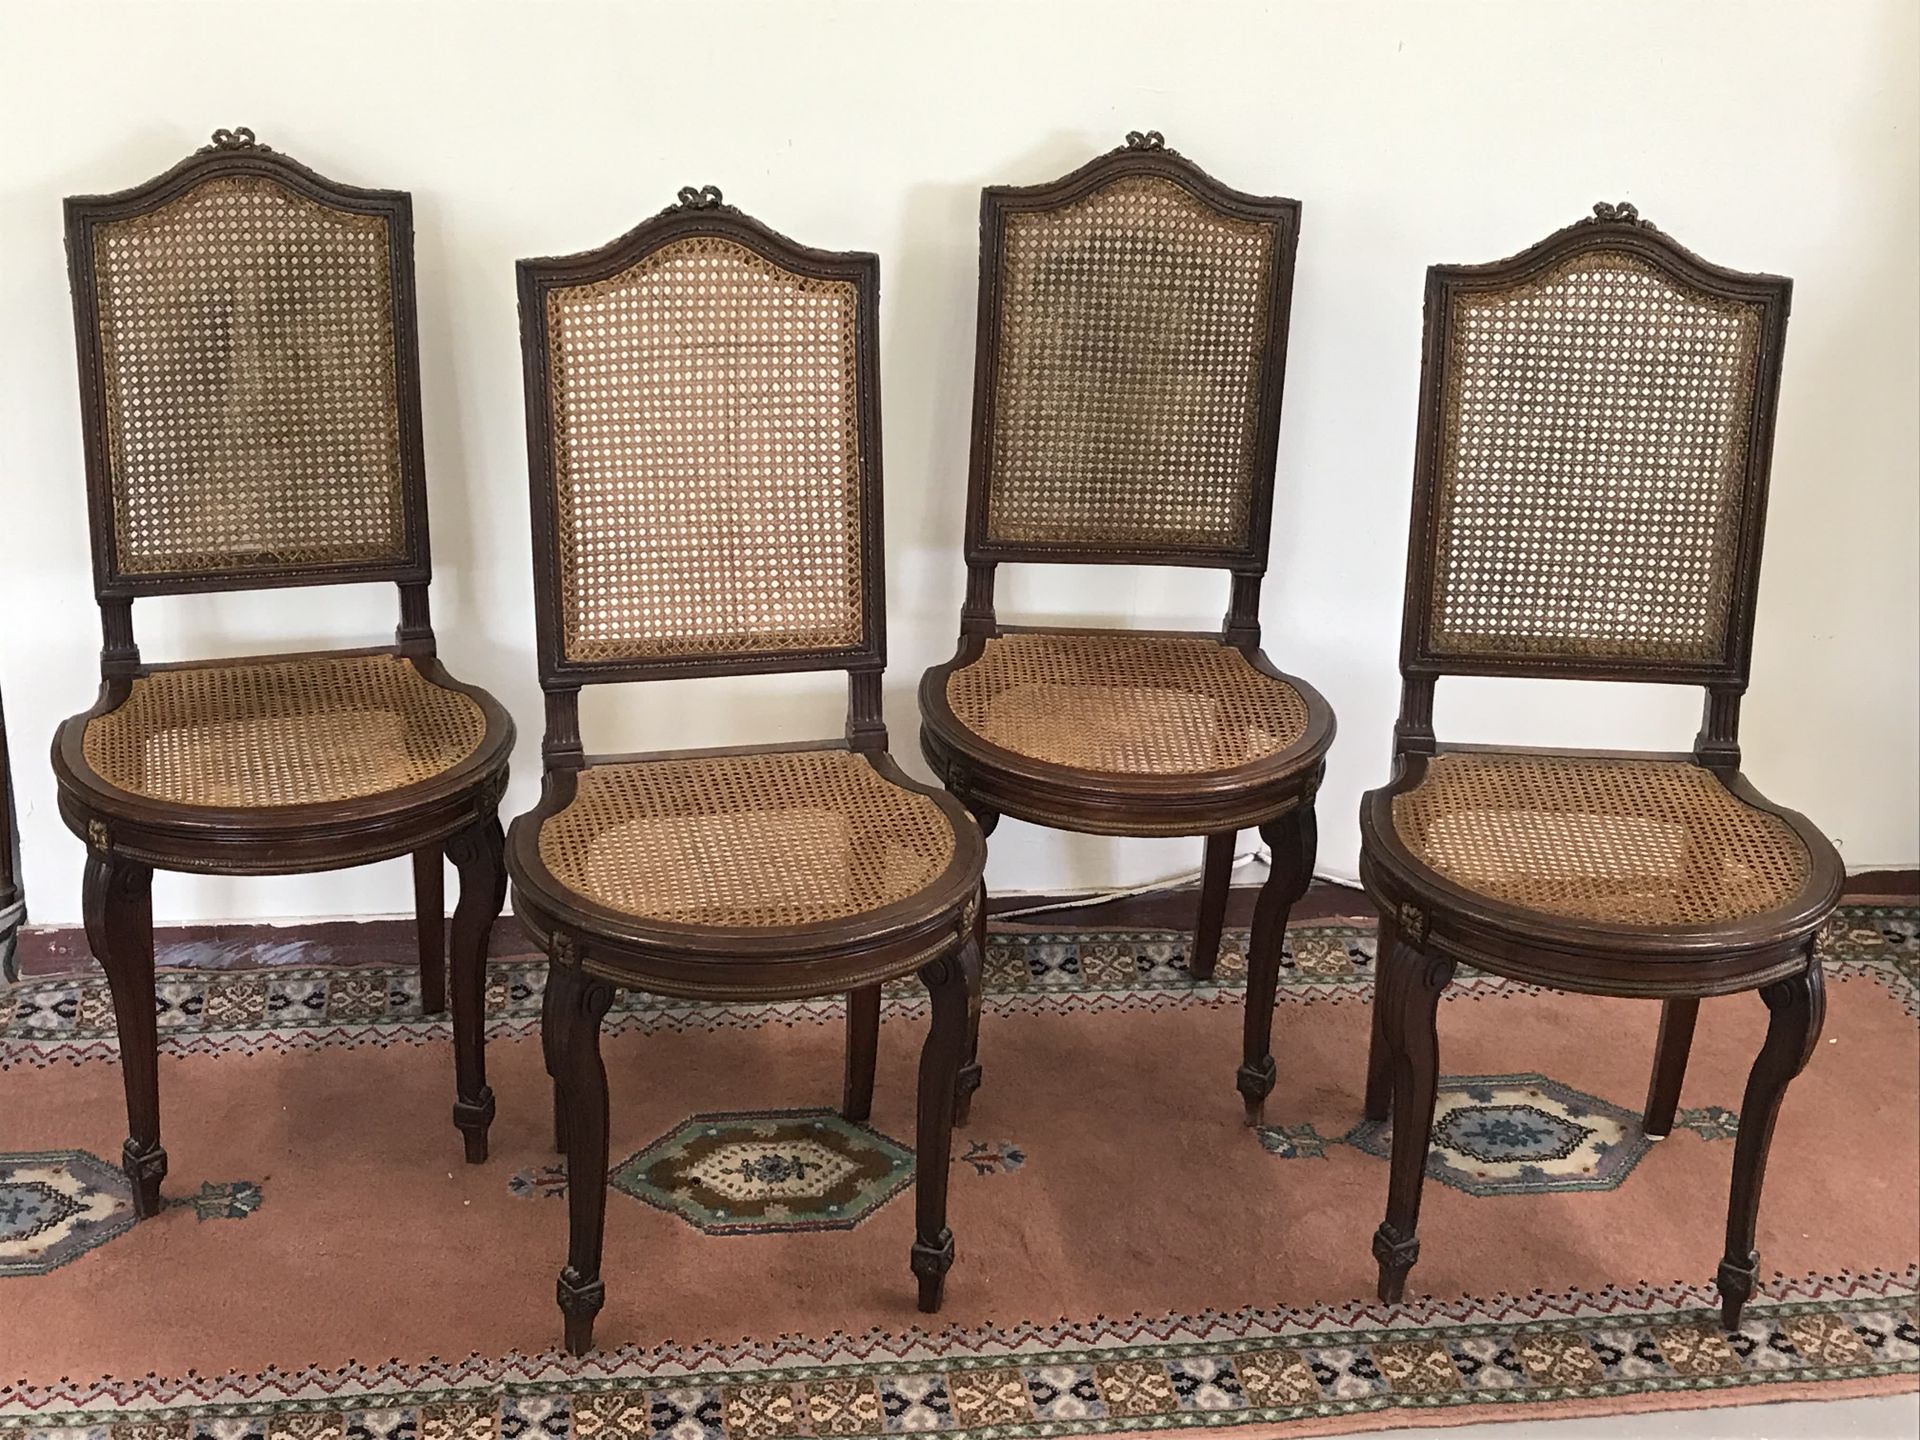 Null Suite of four CHAIRS

Louis XVI style, carved wood and gilt bronze ornament&hellip;